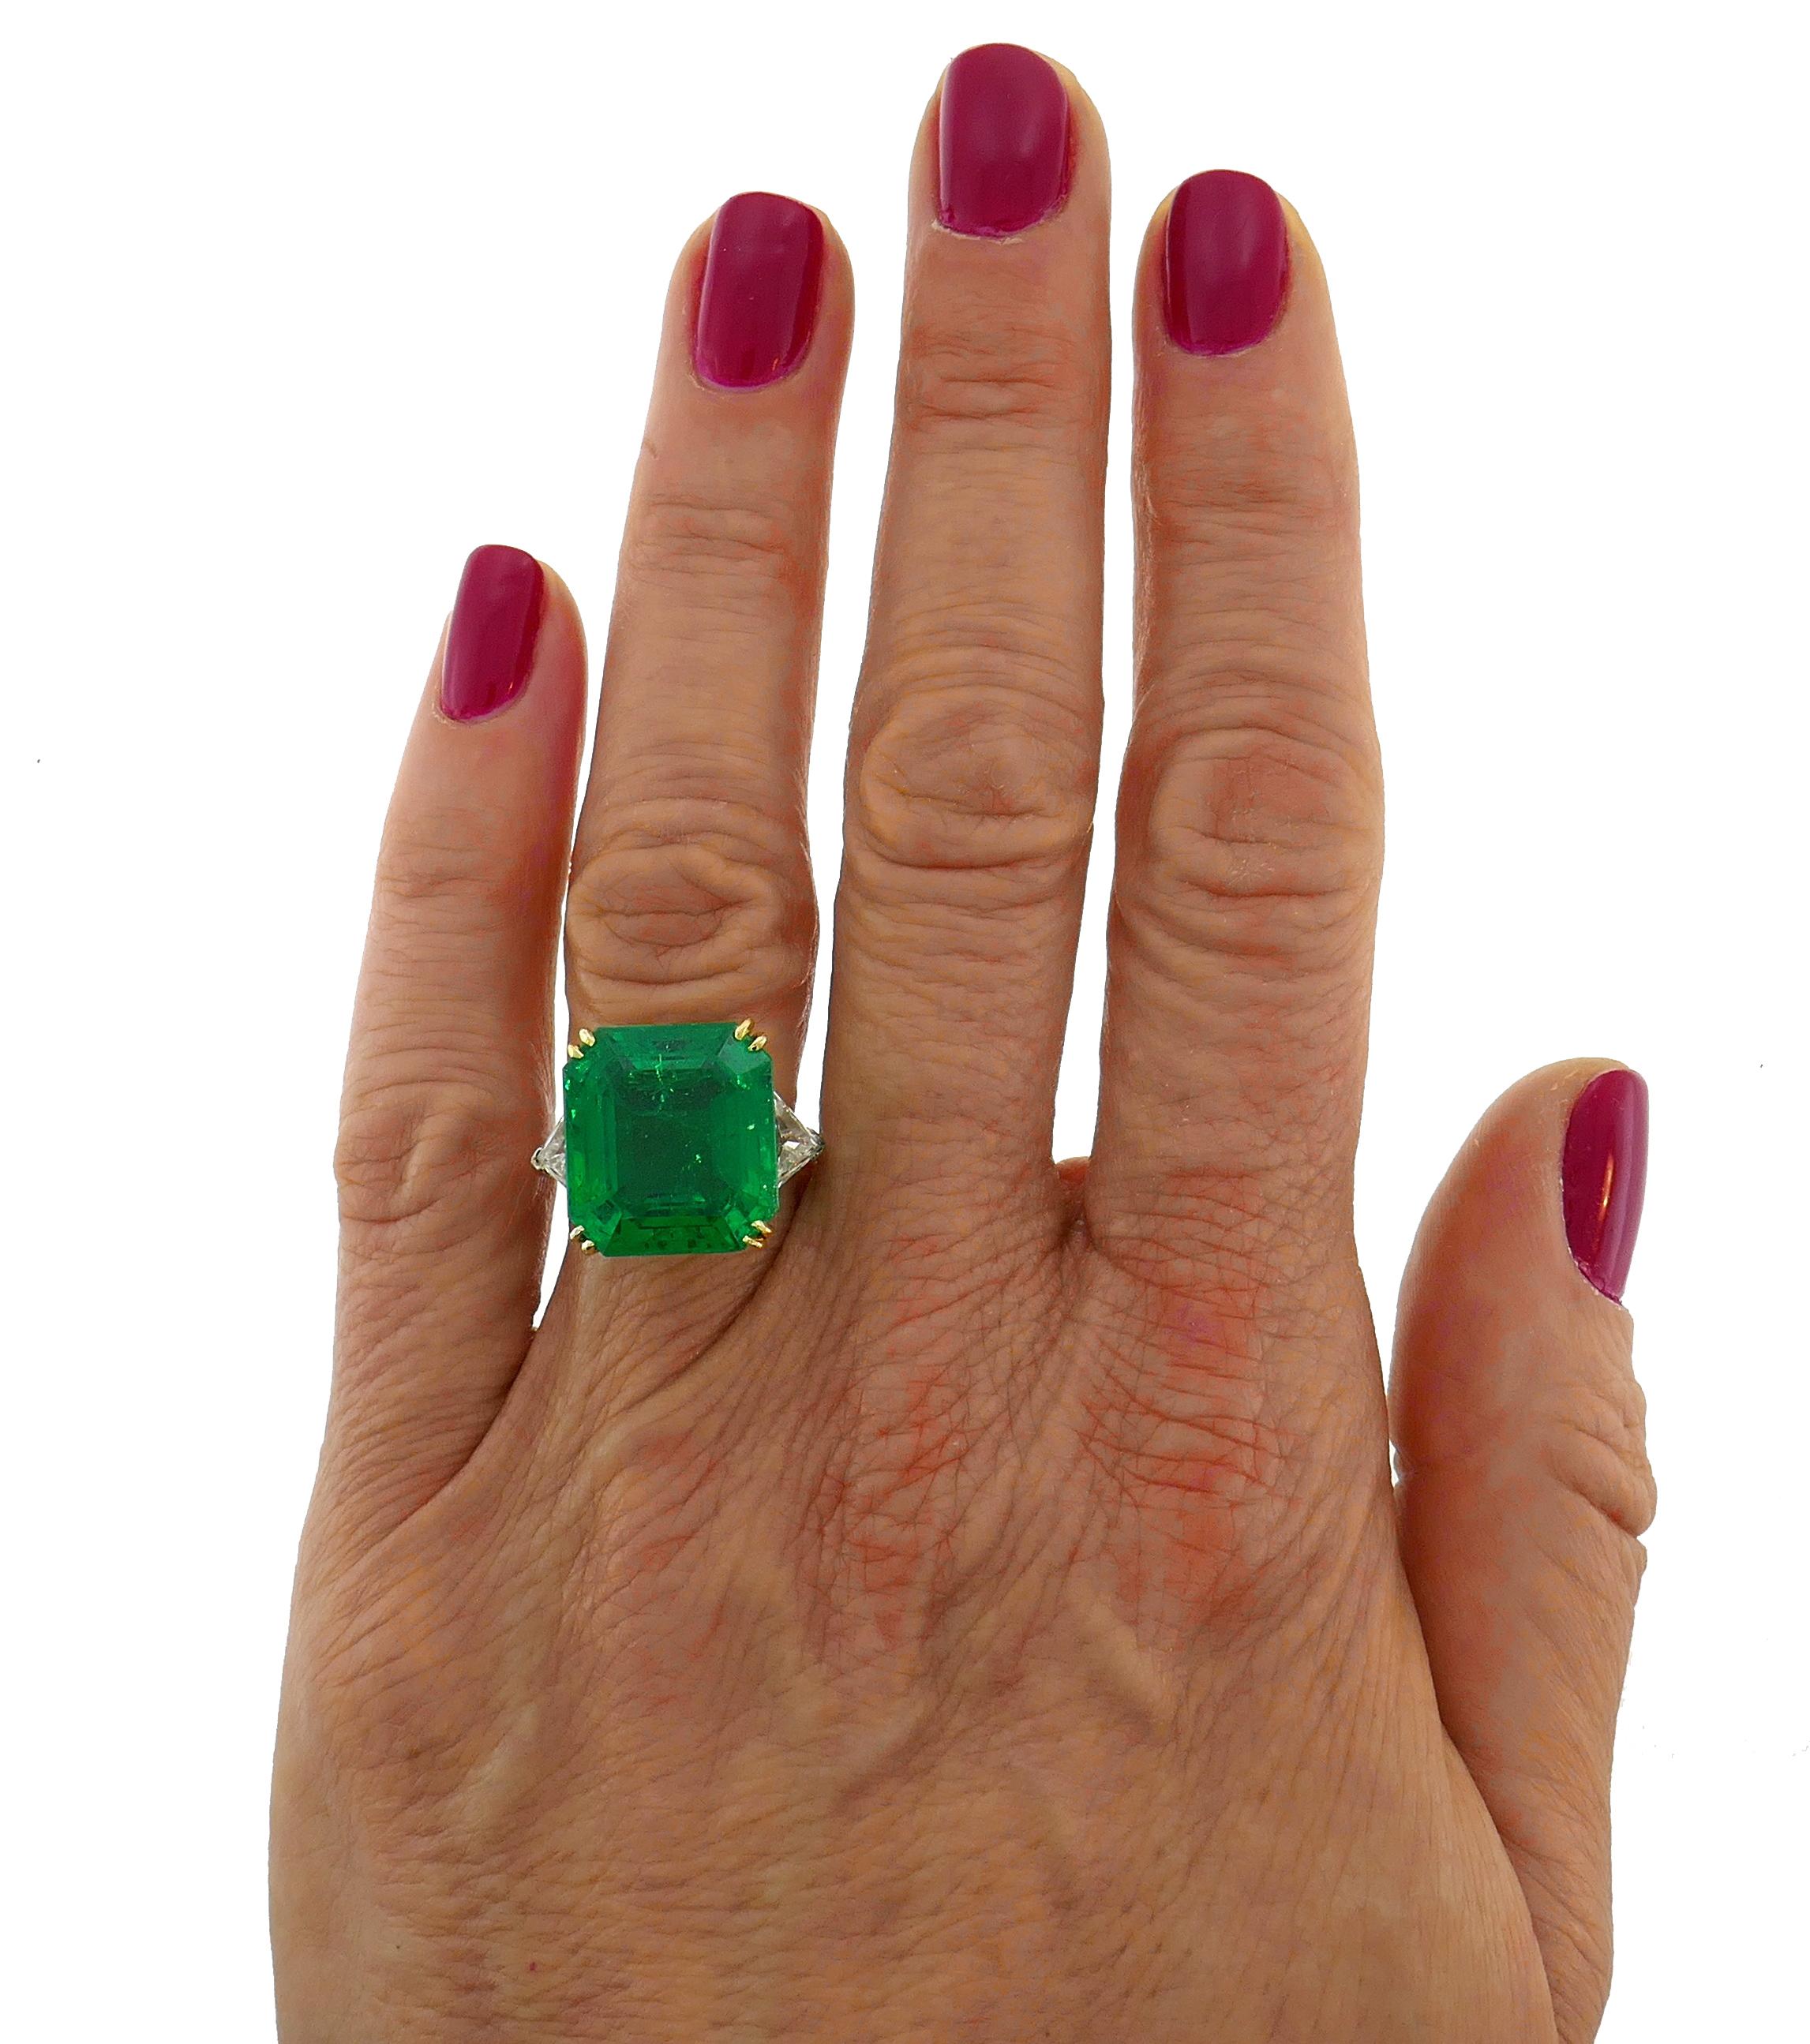 Stunning three-stone platinum ring created by Harry Winston. The ring features an amazing color with fascinating glow 14.04-ct Colombian emerald flanked with two trillion cut diamonds. The emerald measures 15.39 x 14.16 x 9.16 mm and comes with two